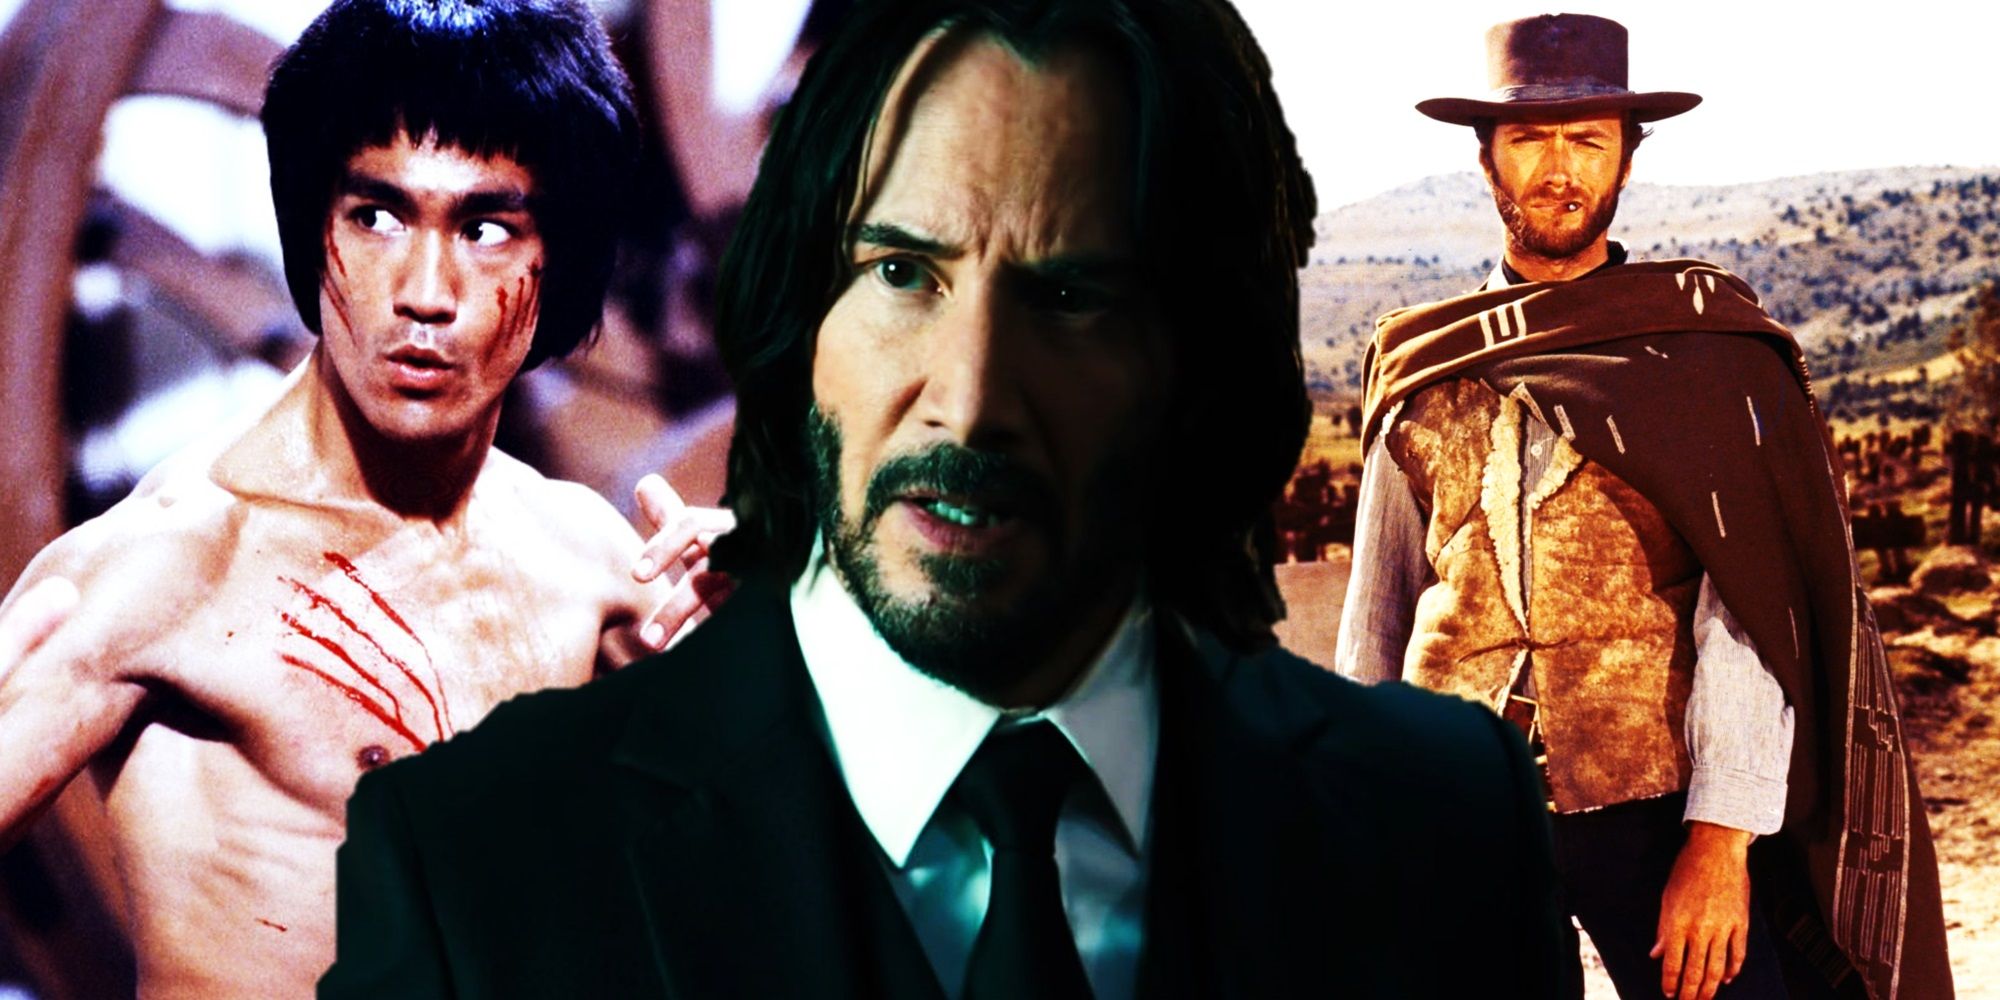 Collage of Bruce Lee in Enter the Dragon, Keanu Reeves in John Wick Chapter 4, and Clint Eastwood in The Good, the Bad, and the Ugly